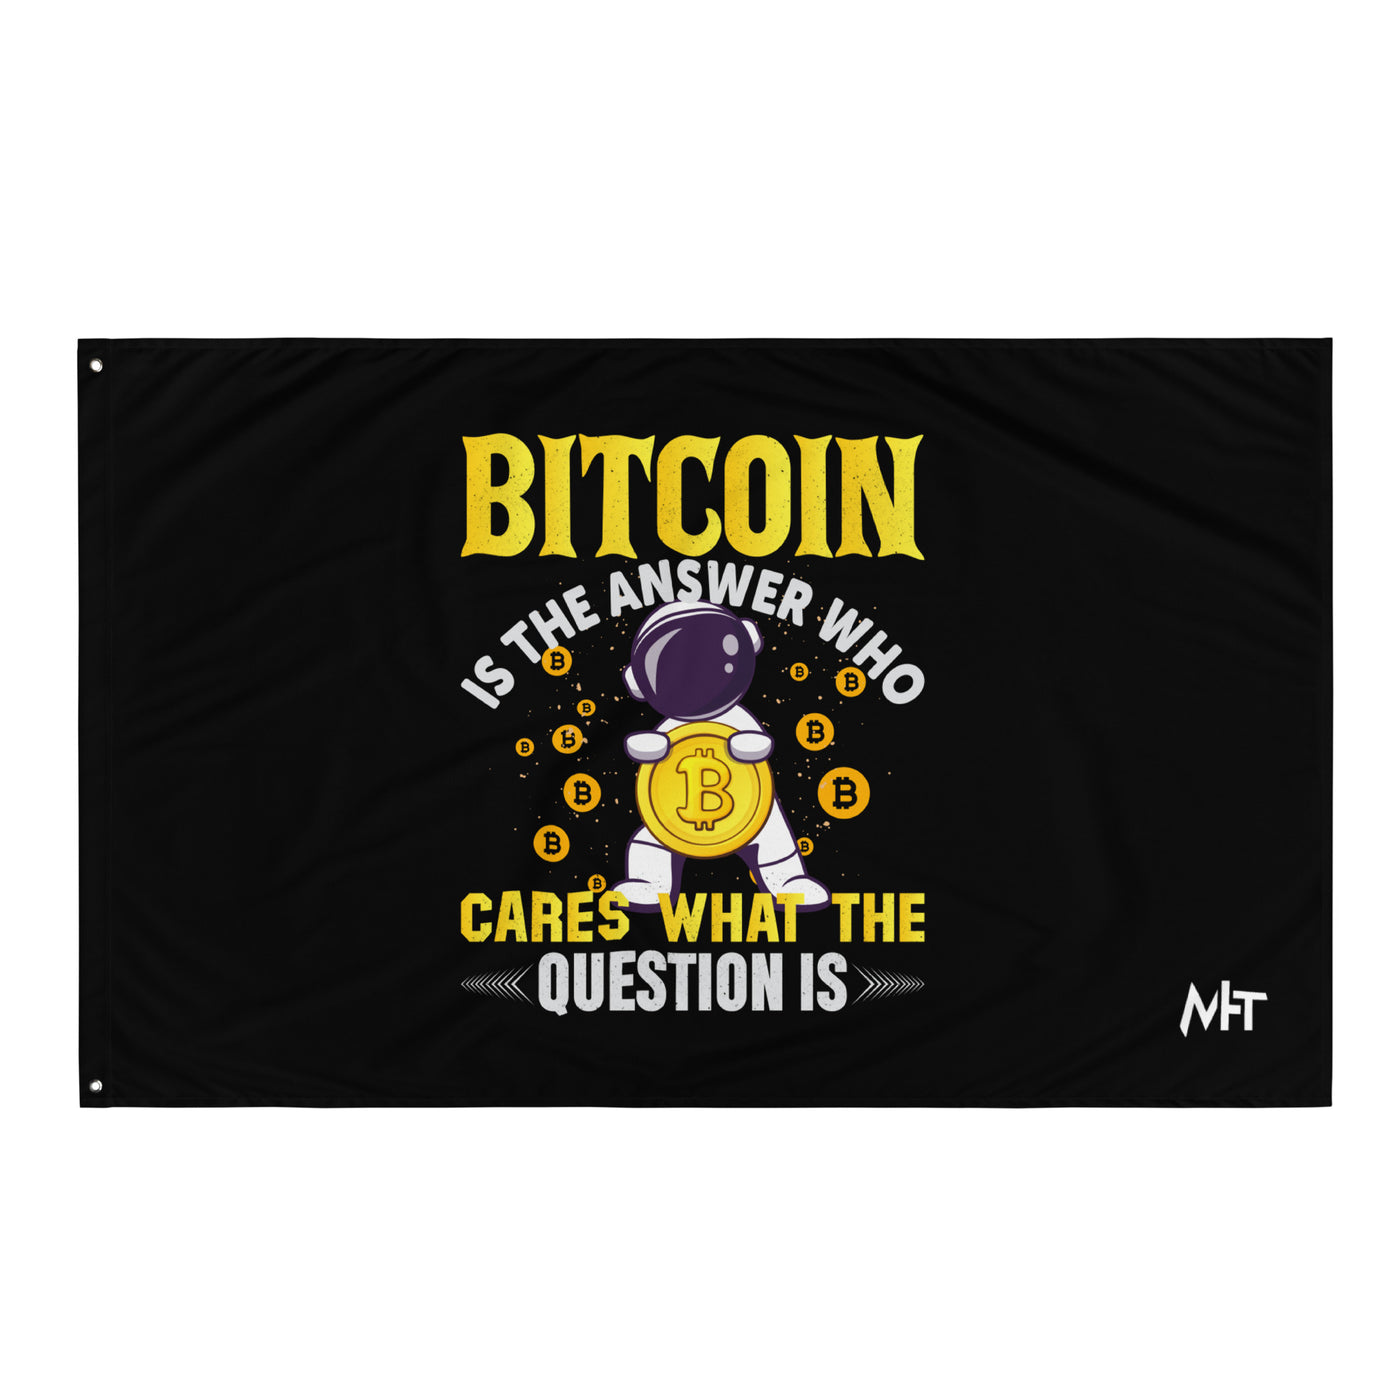 Bitcoin is the Answer! Who Cares what the question is? - Flag